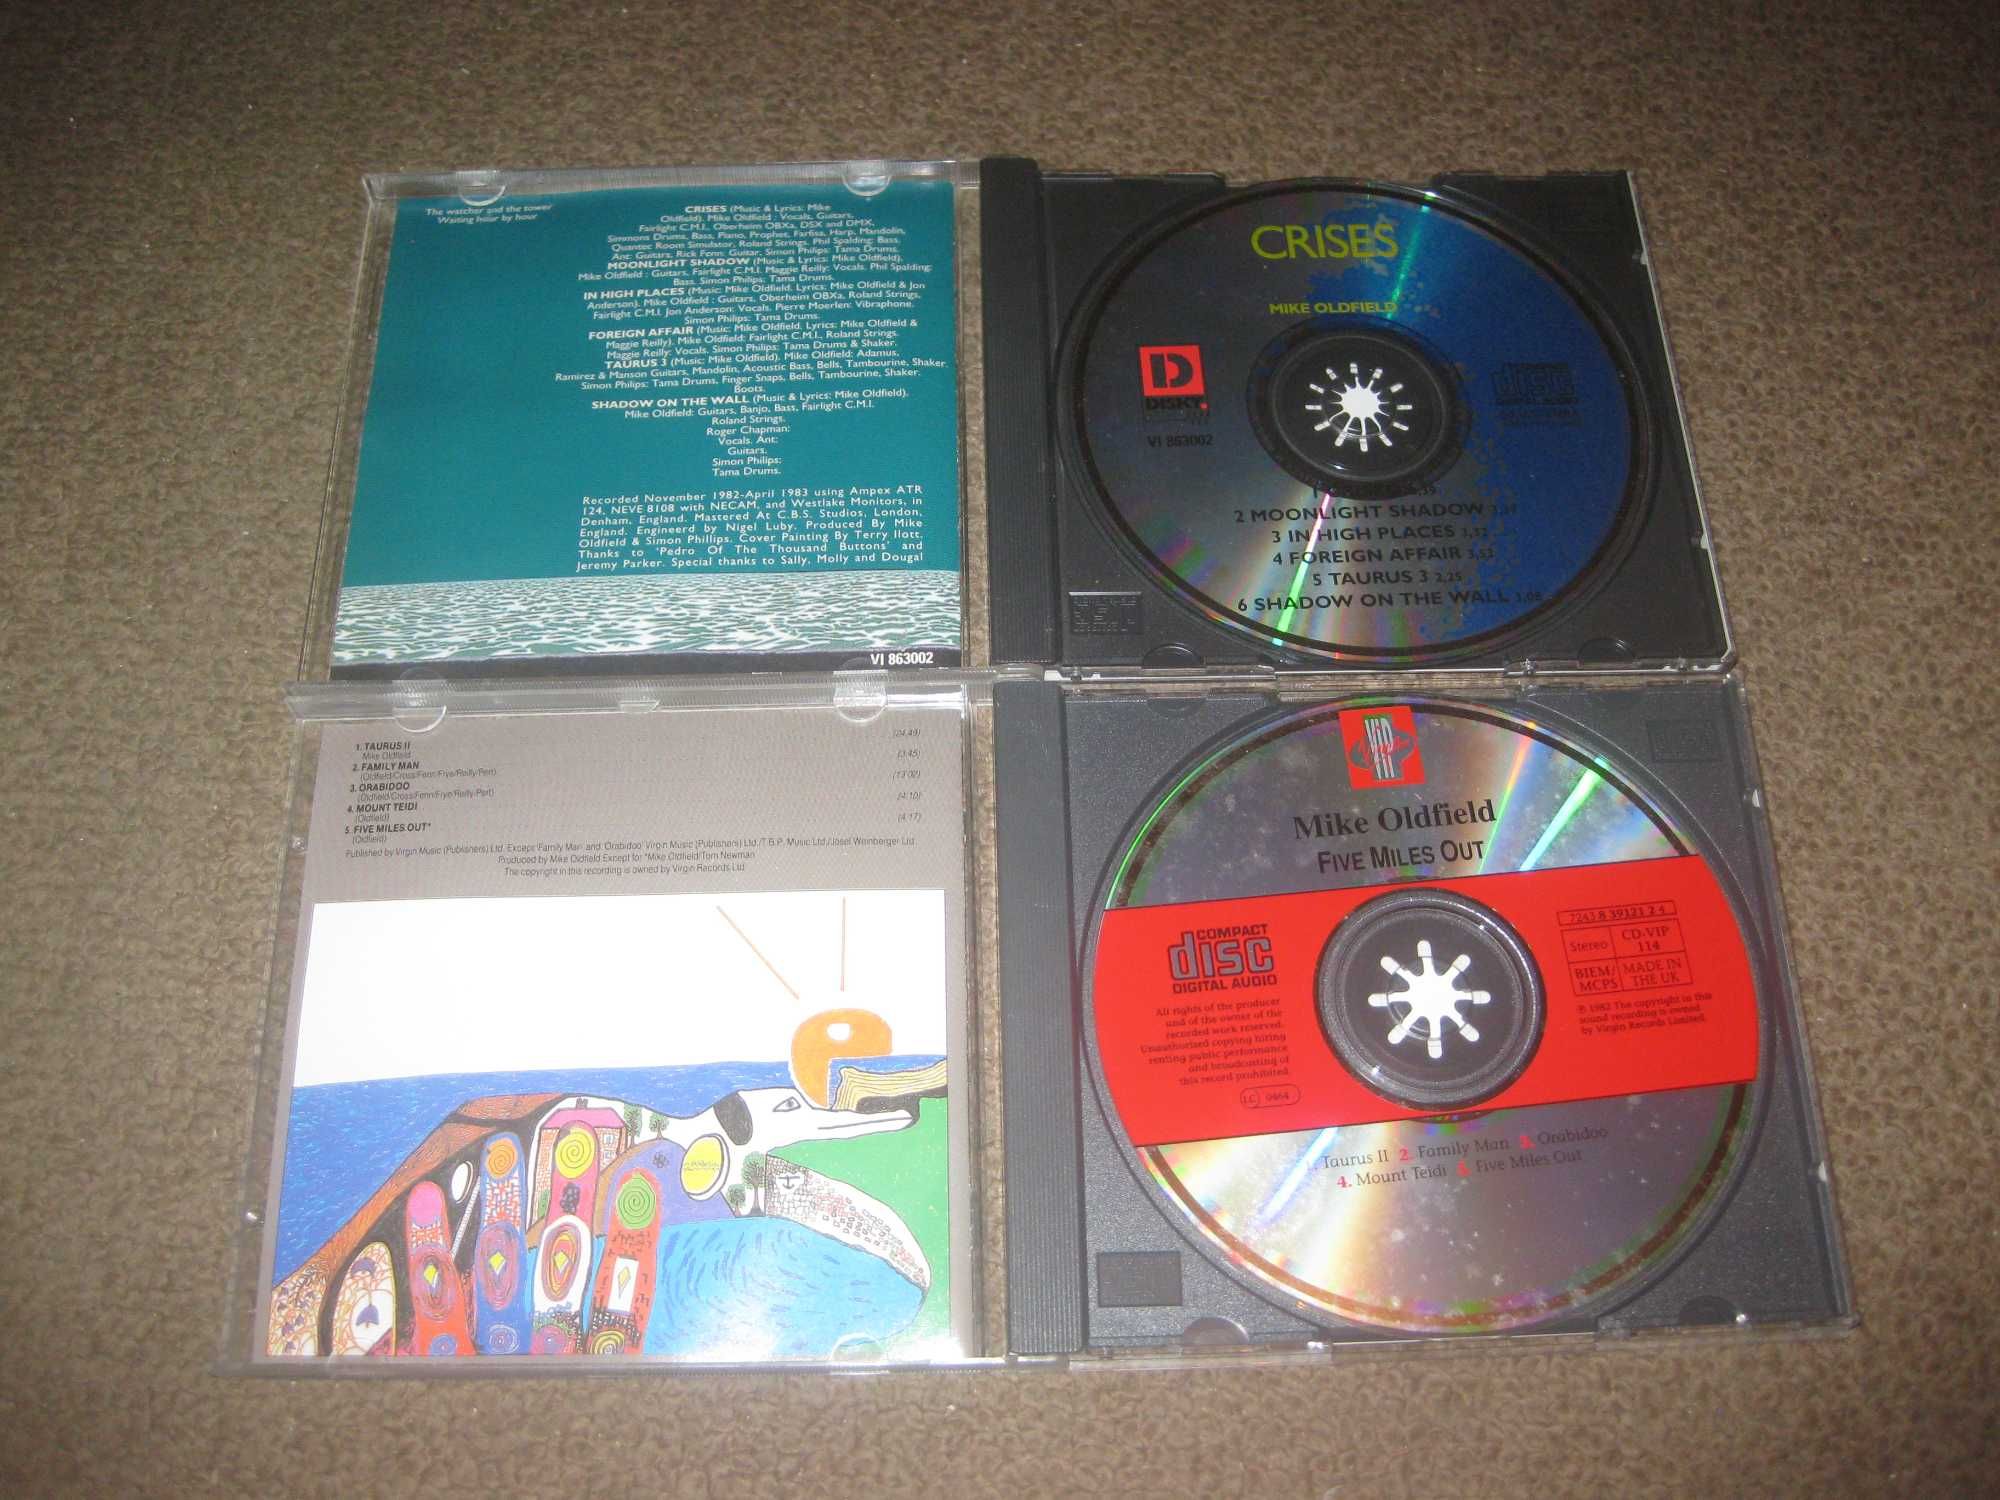 2 CDs do "Mike Oldfield"